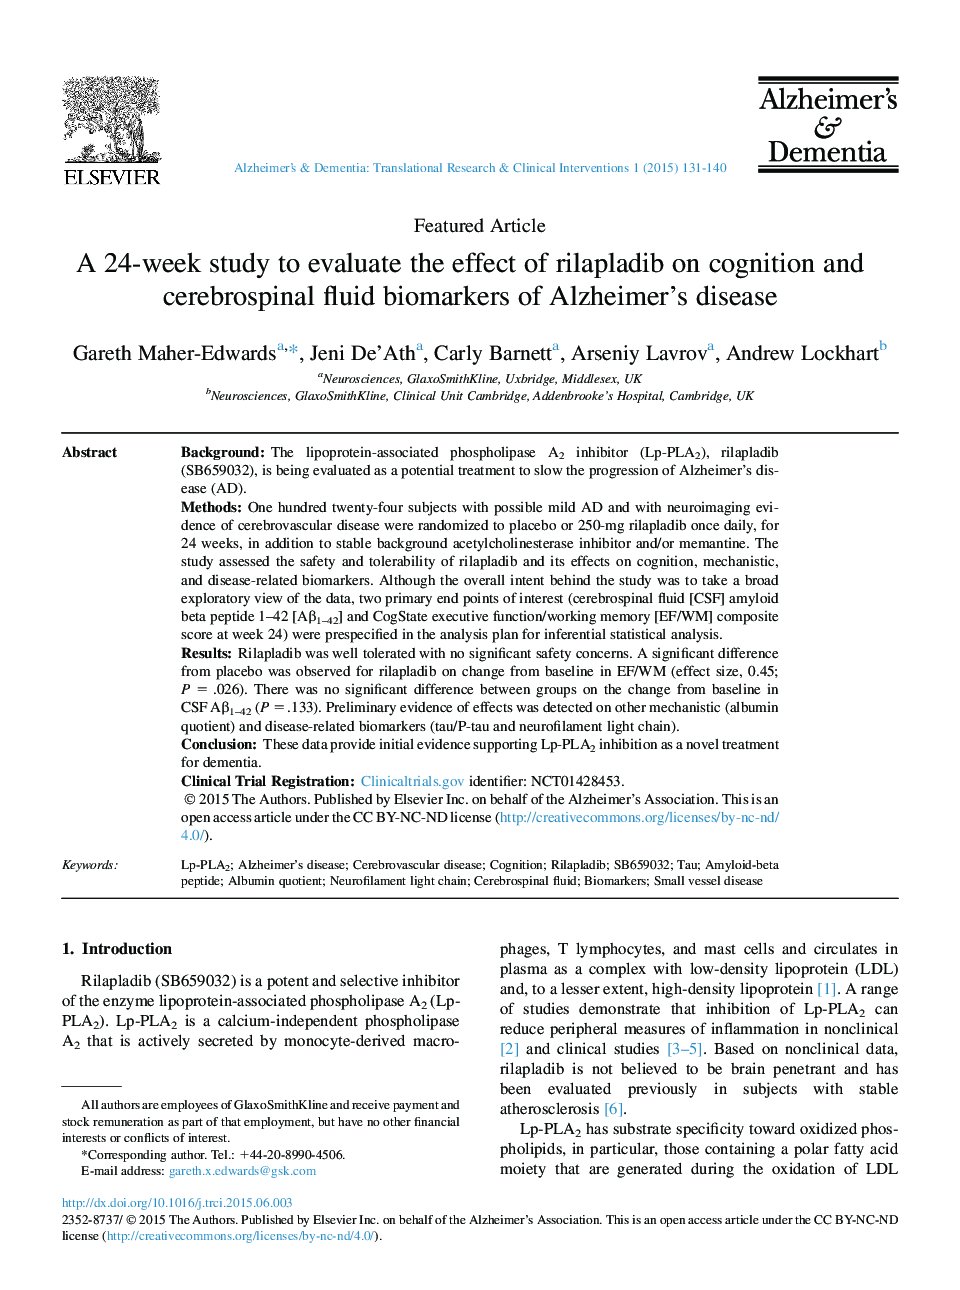 A 24-week study to evaluate the effect of rilapladib on cognition and cerebrospinal fluid biomarkers of Alzheimer's disease 